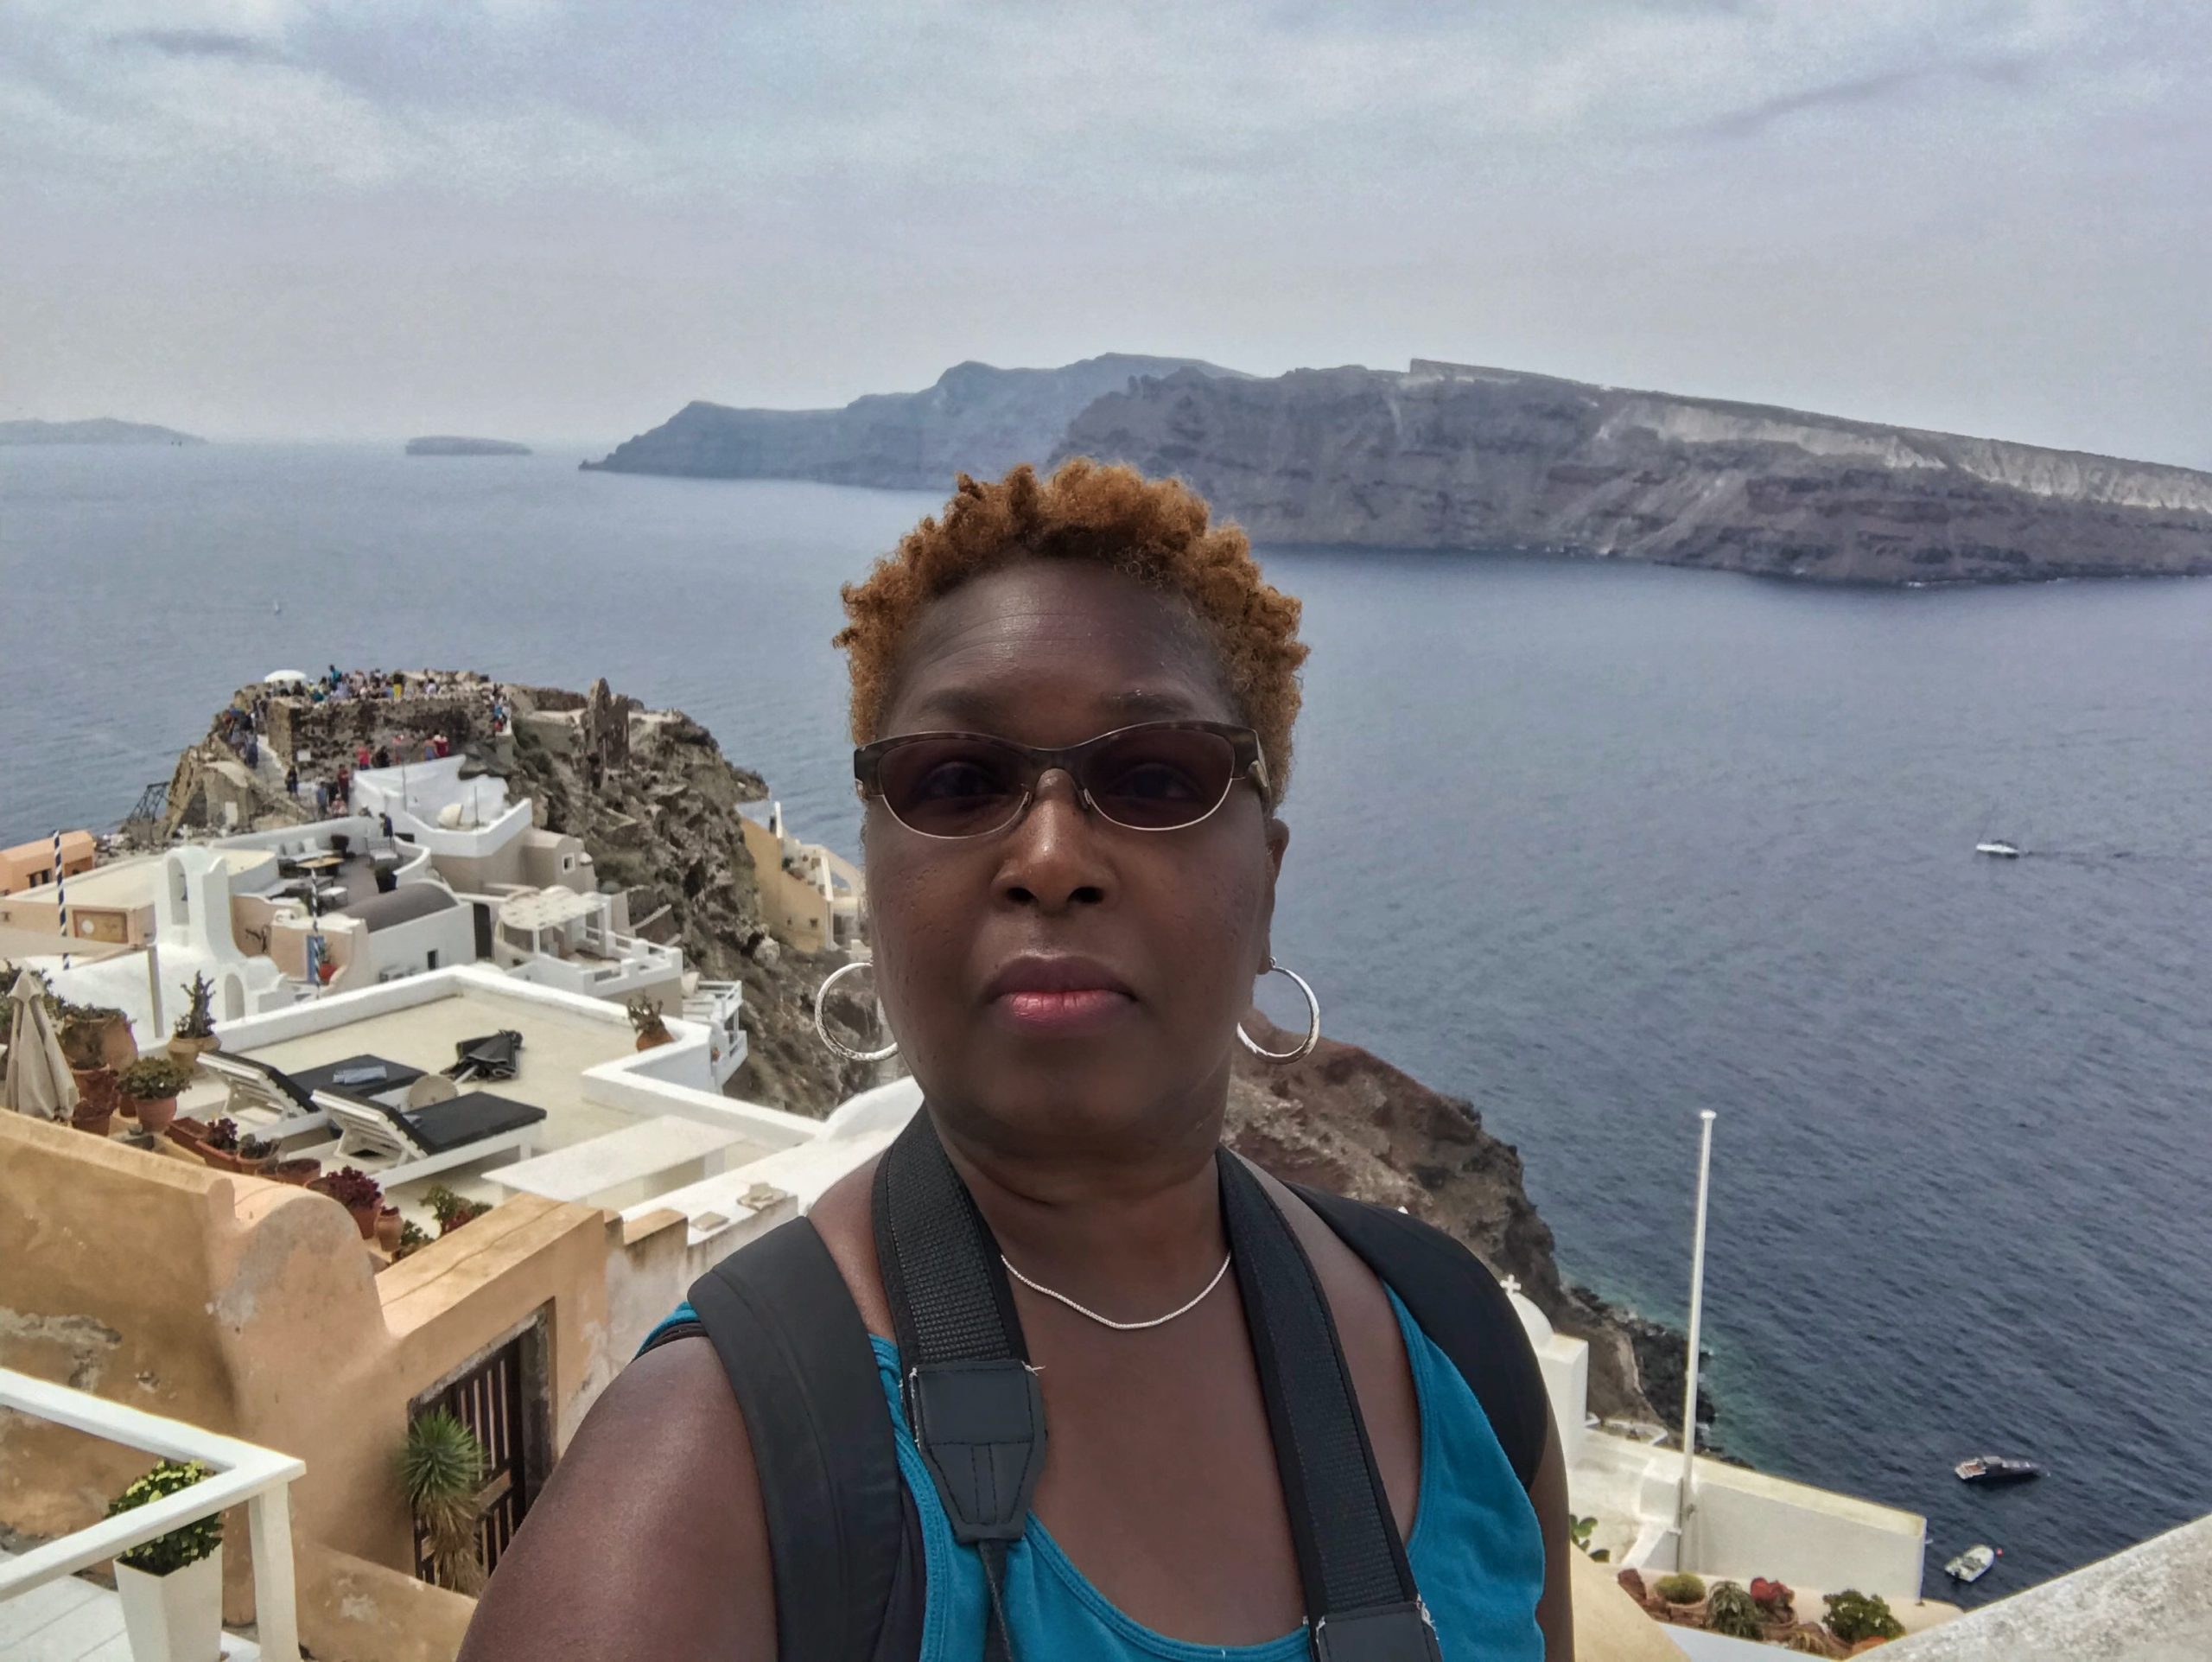 Danielle Lewis, owner of SelfishMe Travel LLC, in Oia, Santorini, Greece - image taken with an iPhone 7